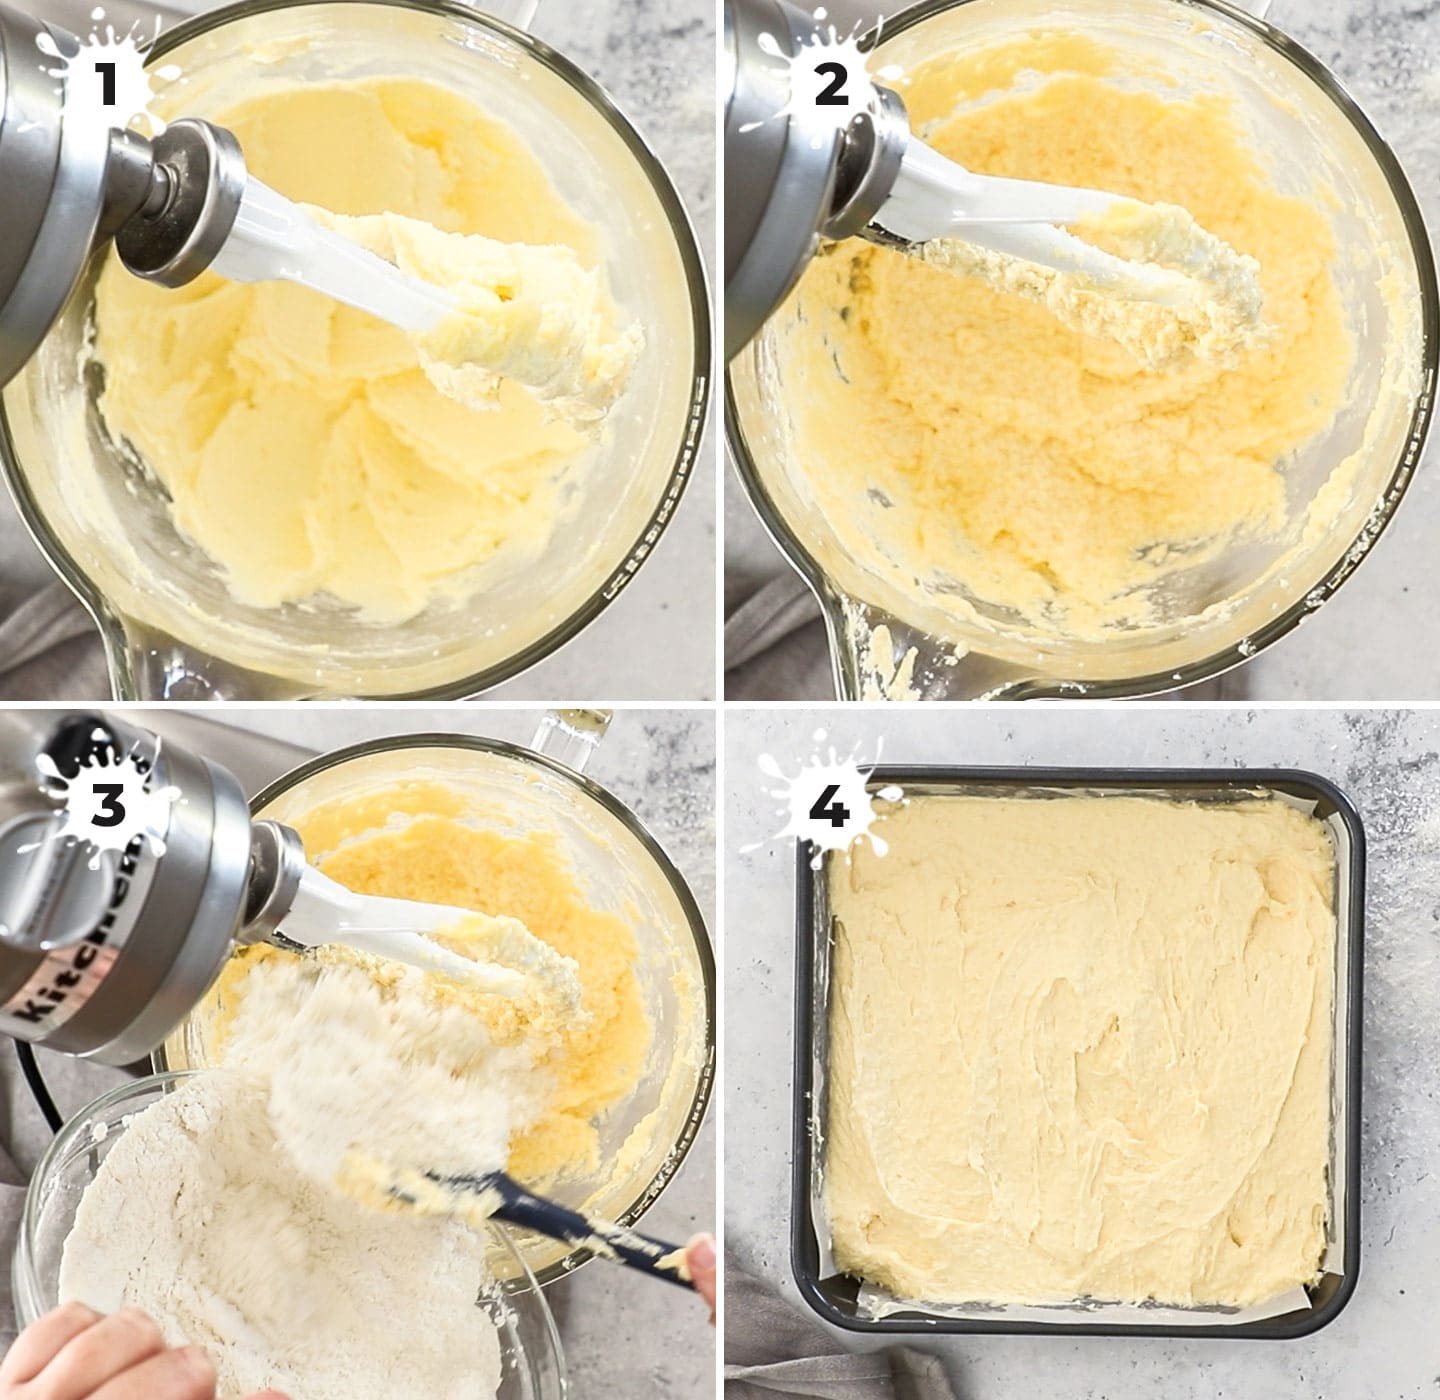 Showing how to make the batter.